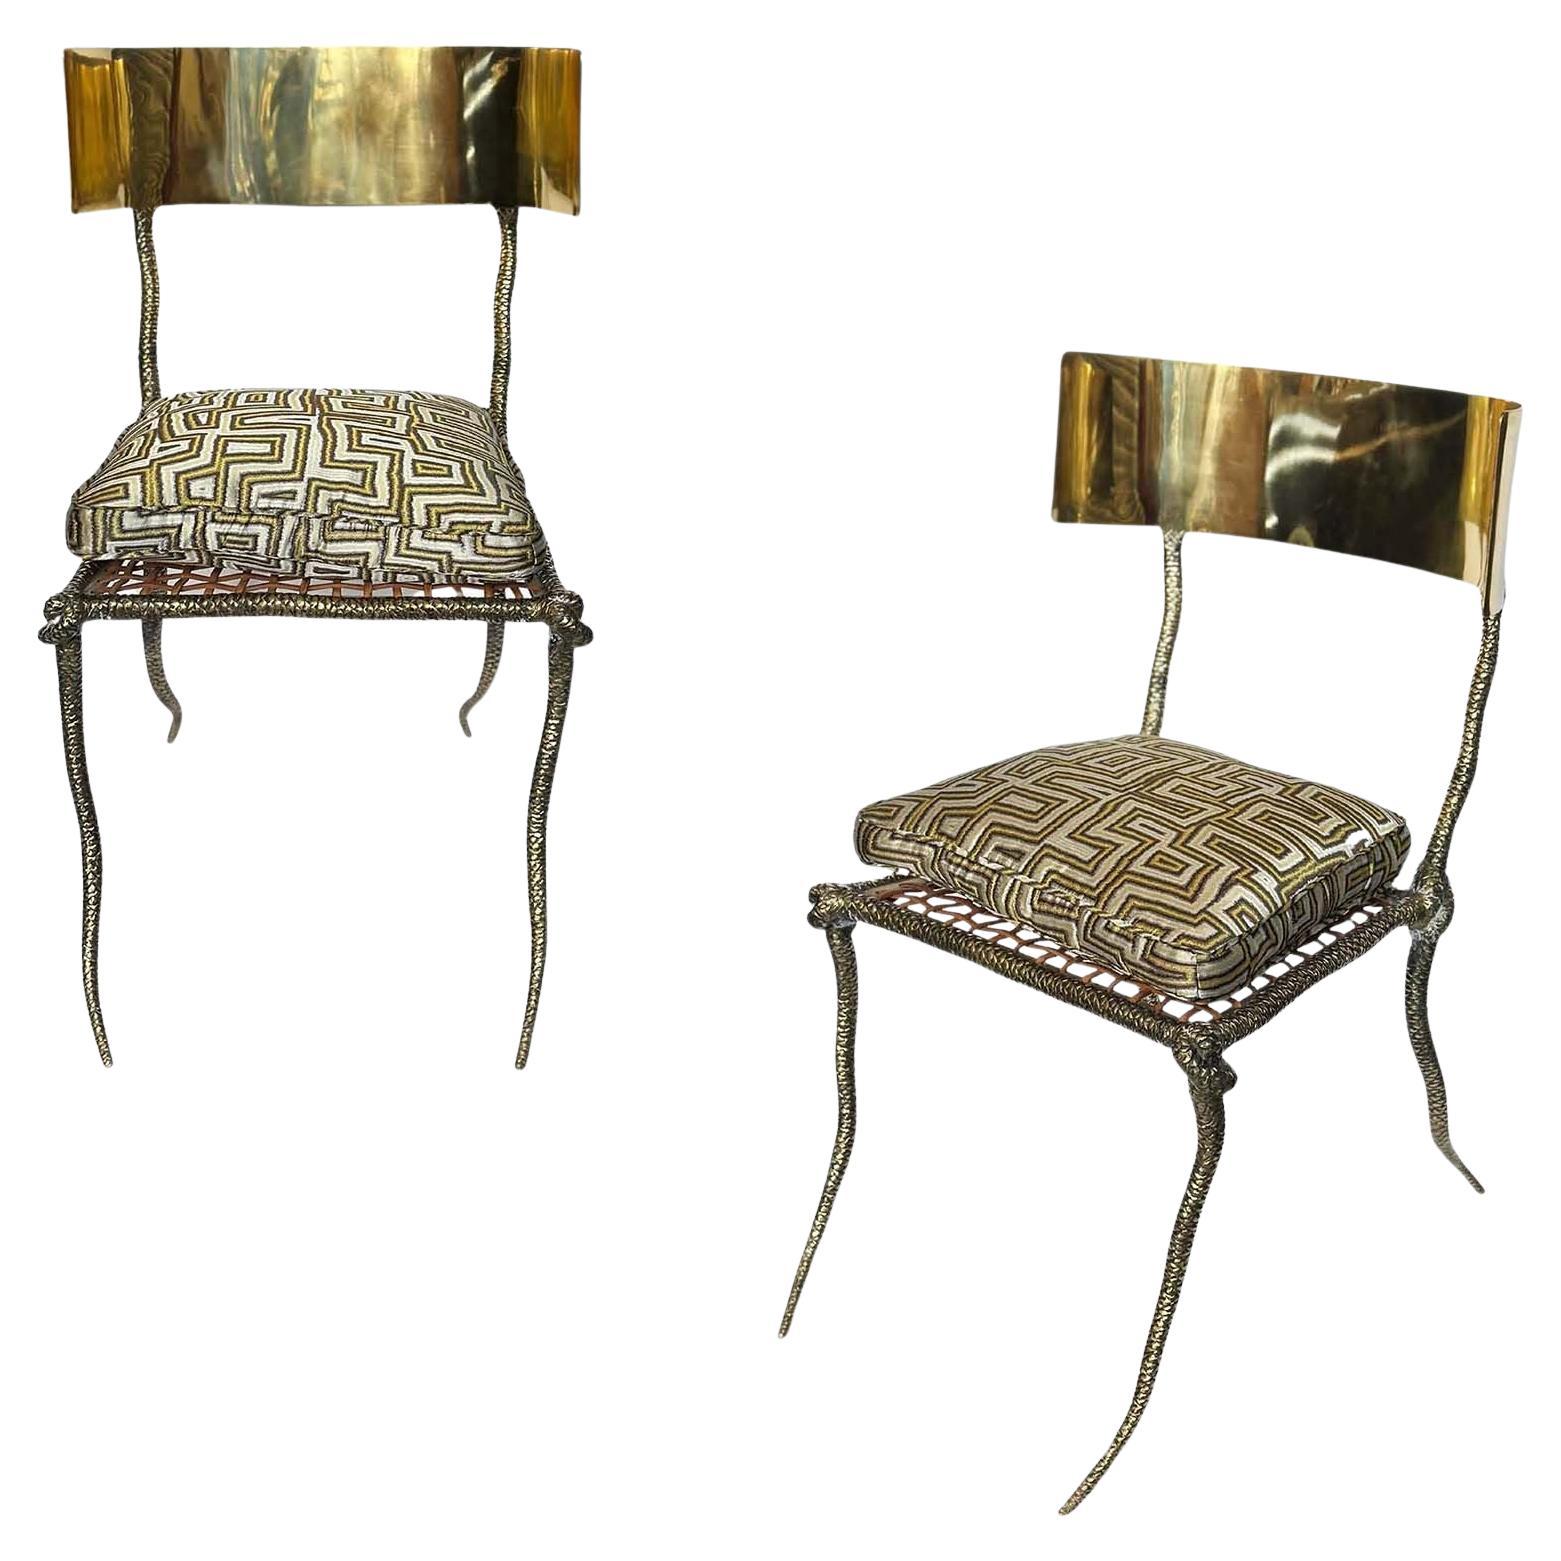 Pair of Polished Brass Klismos Chairs with Snake Design For Sale